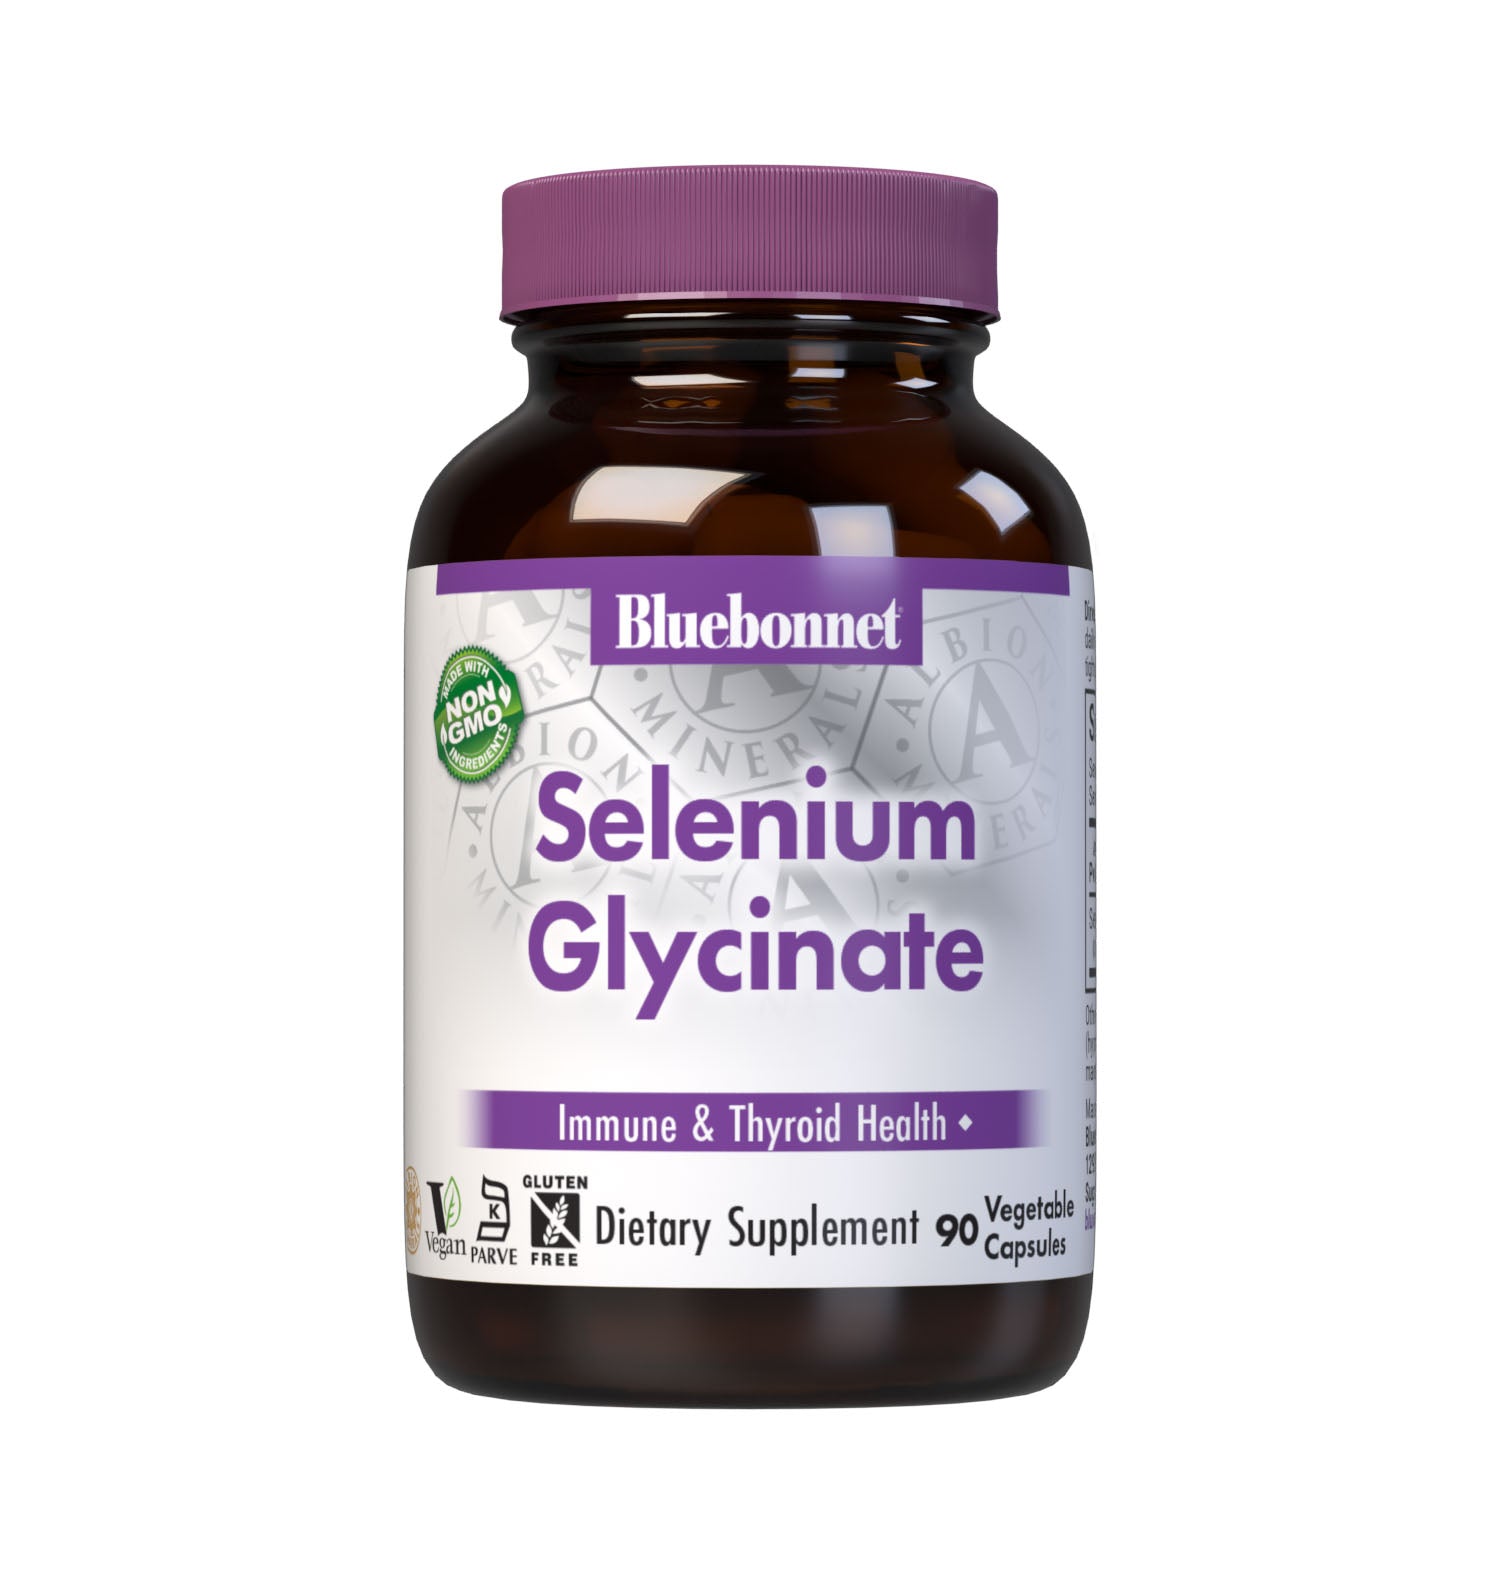 Bluebonnet’s Albion Selenium Glycinate 90 vegetable capsules are formulated with 200 mcg of elemental selenium per serving from a low molecular weight glycerinate amino acid complex from Albion. Selenium is an essential element that is necessary for immune health and thyroid support. #size_90 count